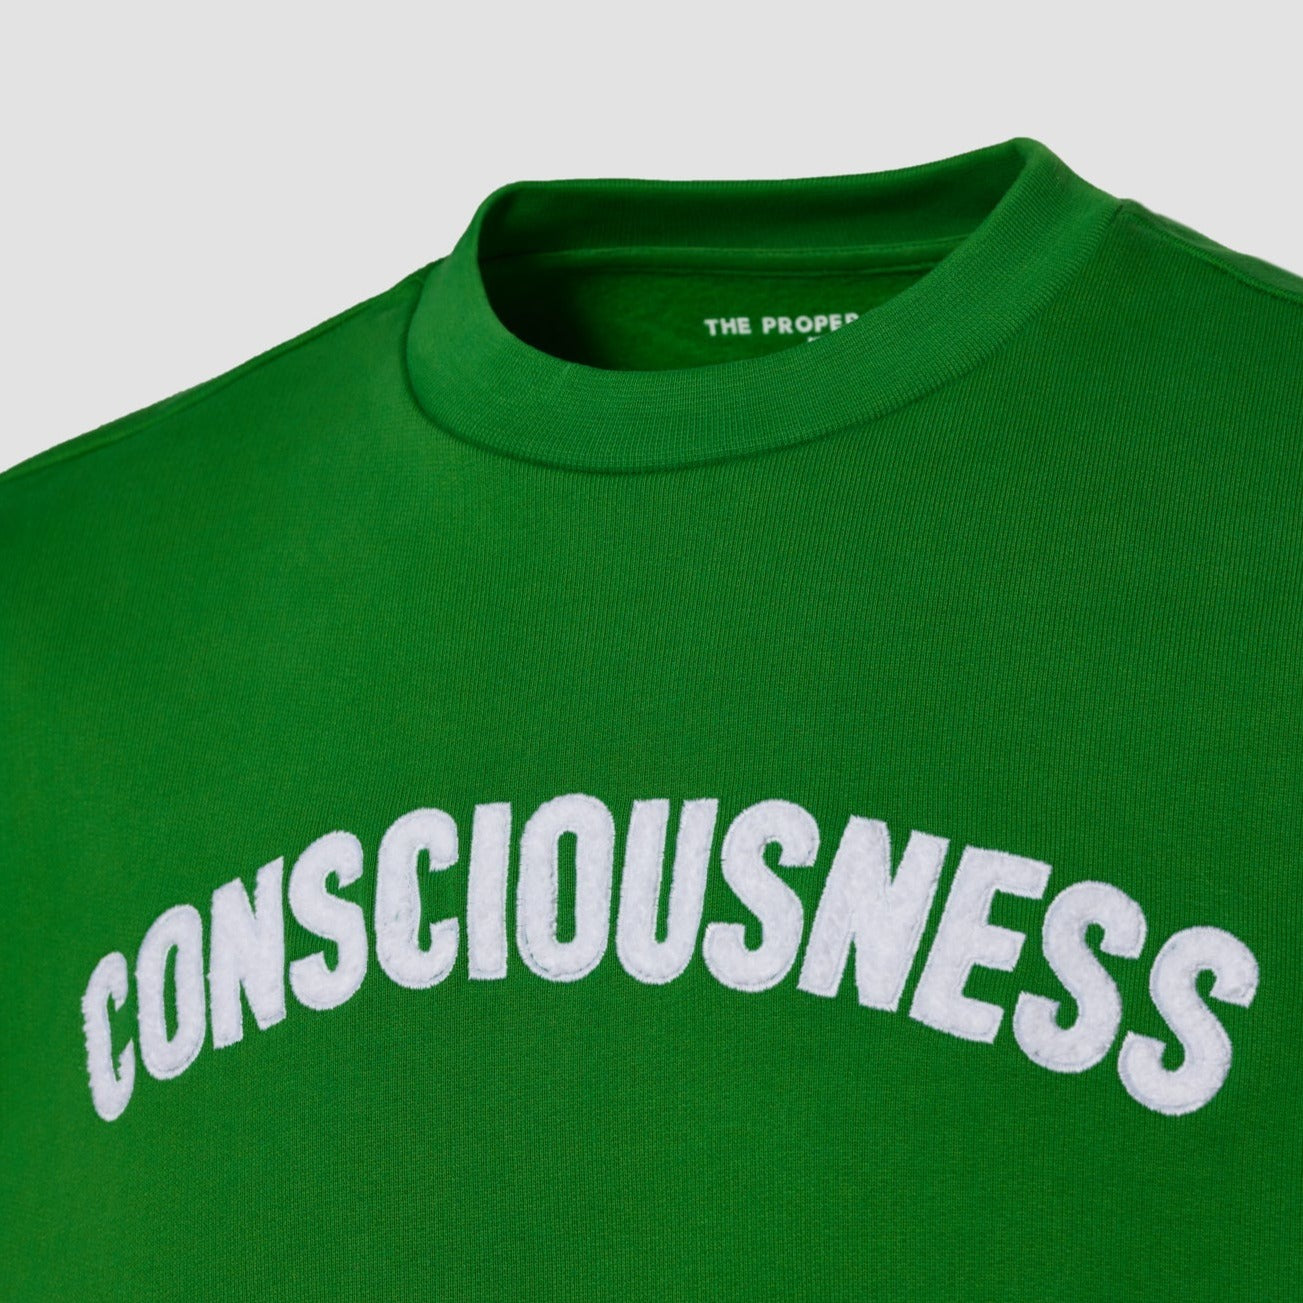 BY TPL ® Consciousness Crewneck Green - The Proper Label ™